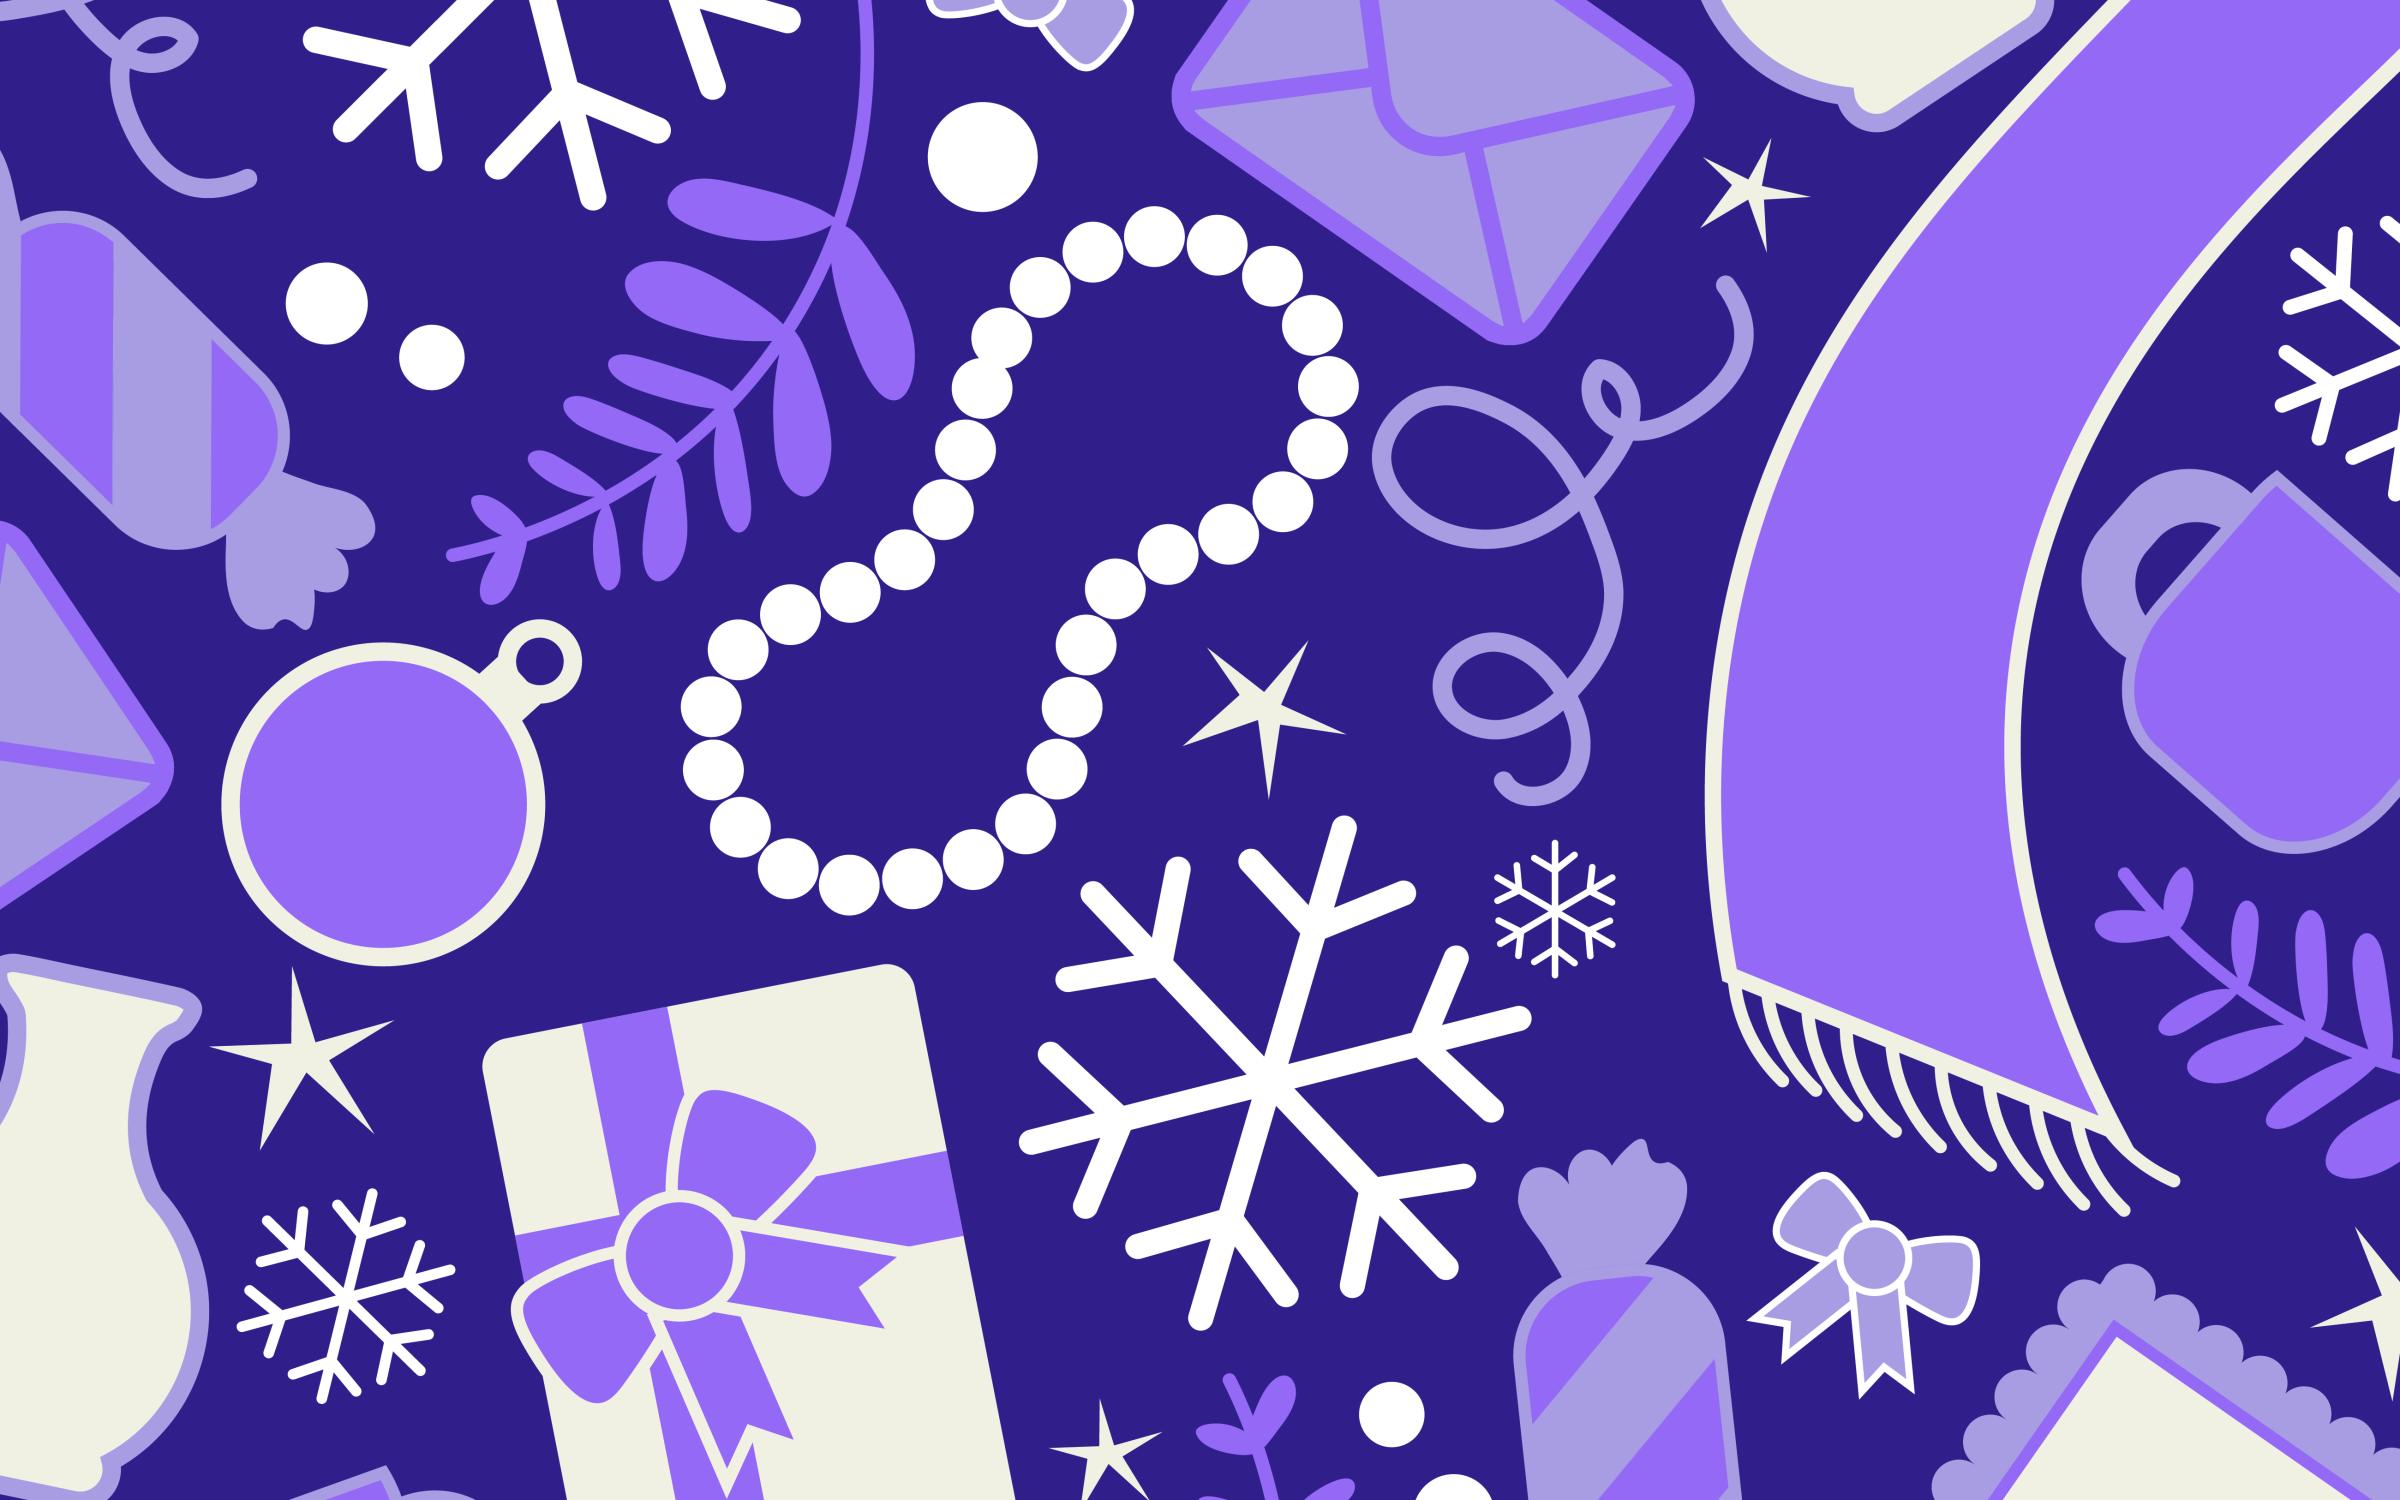 A purple graphic with scarves, gifts, jewelry 